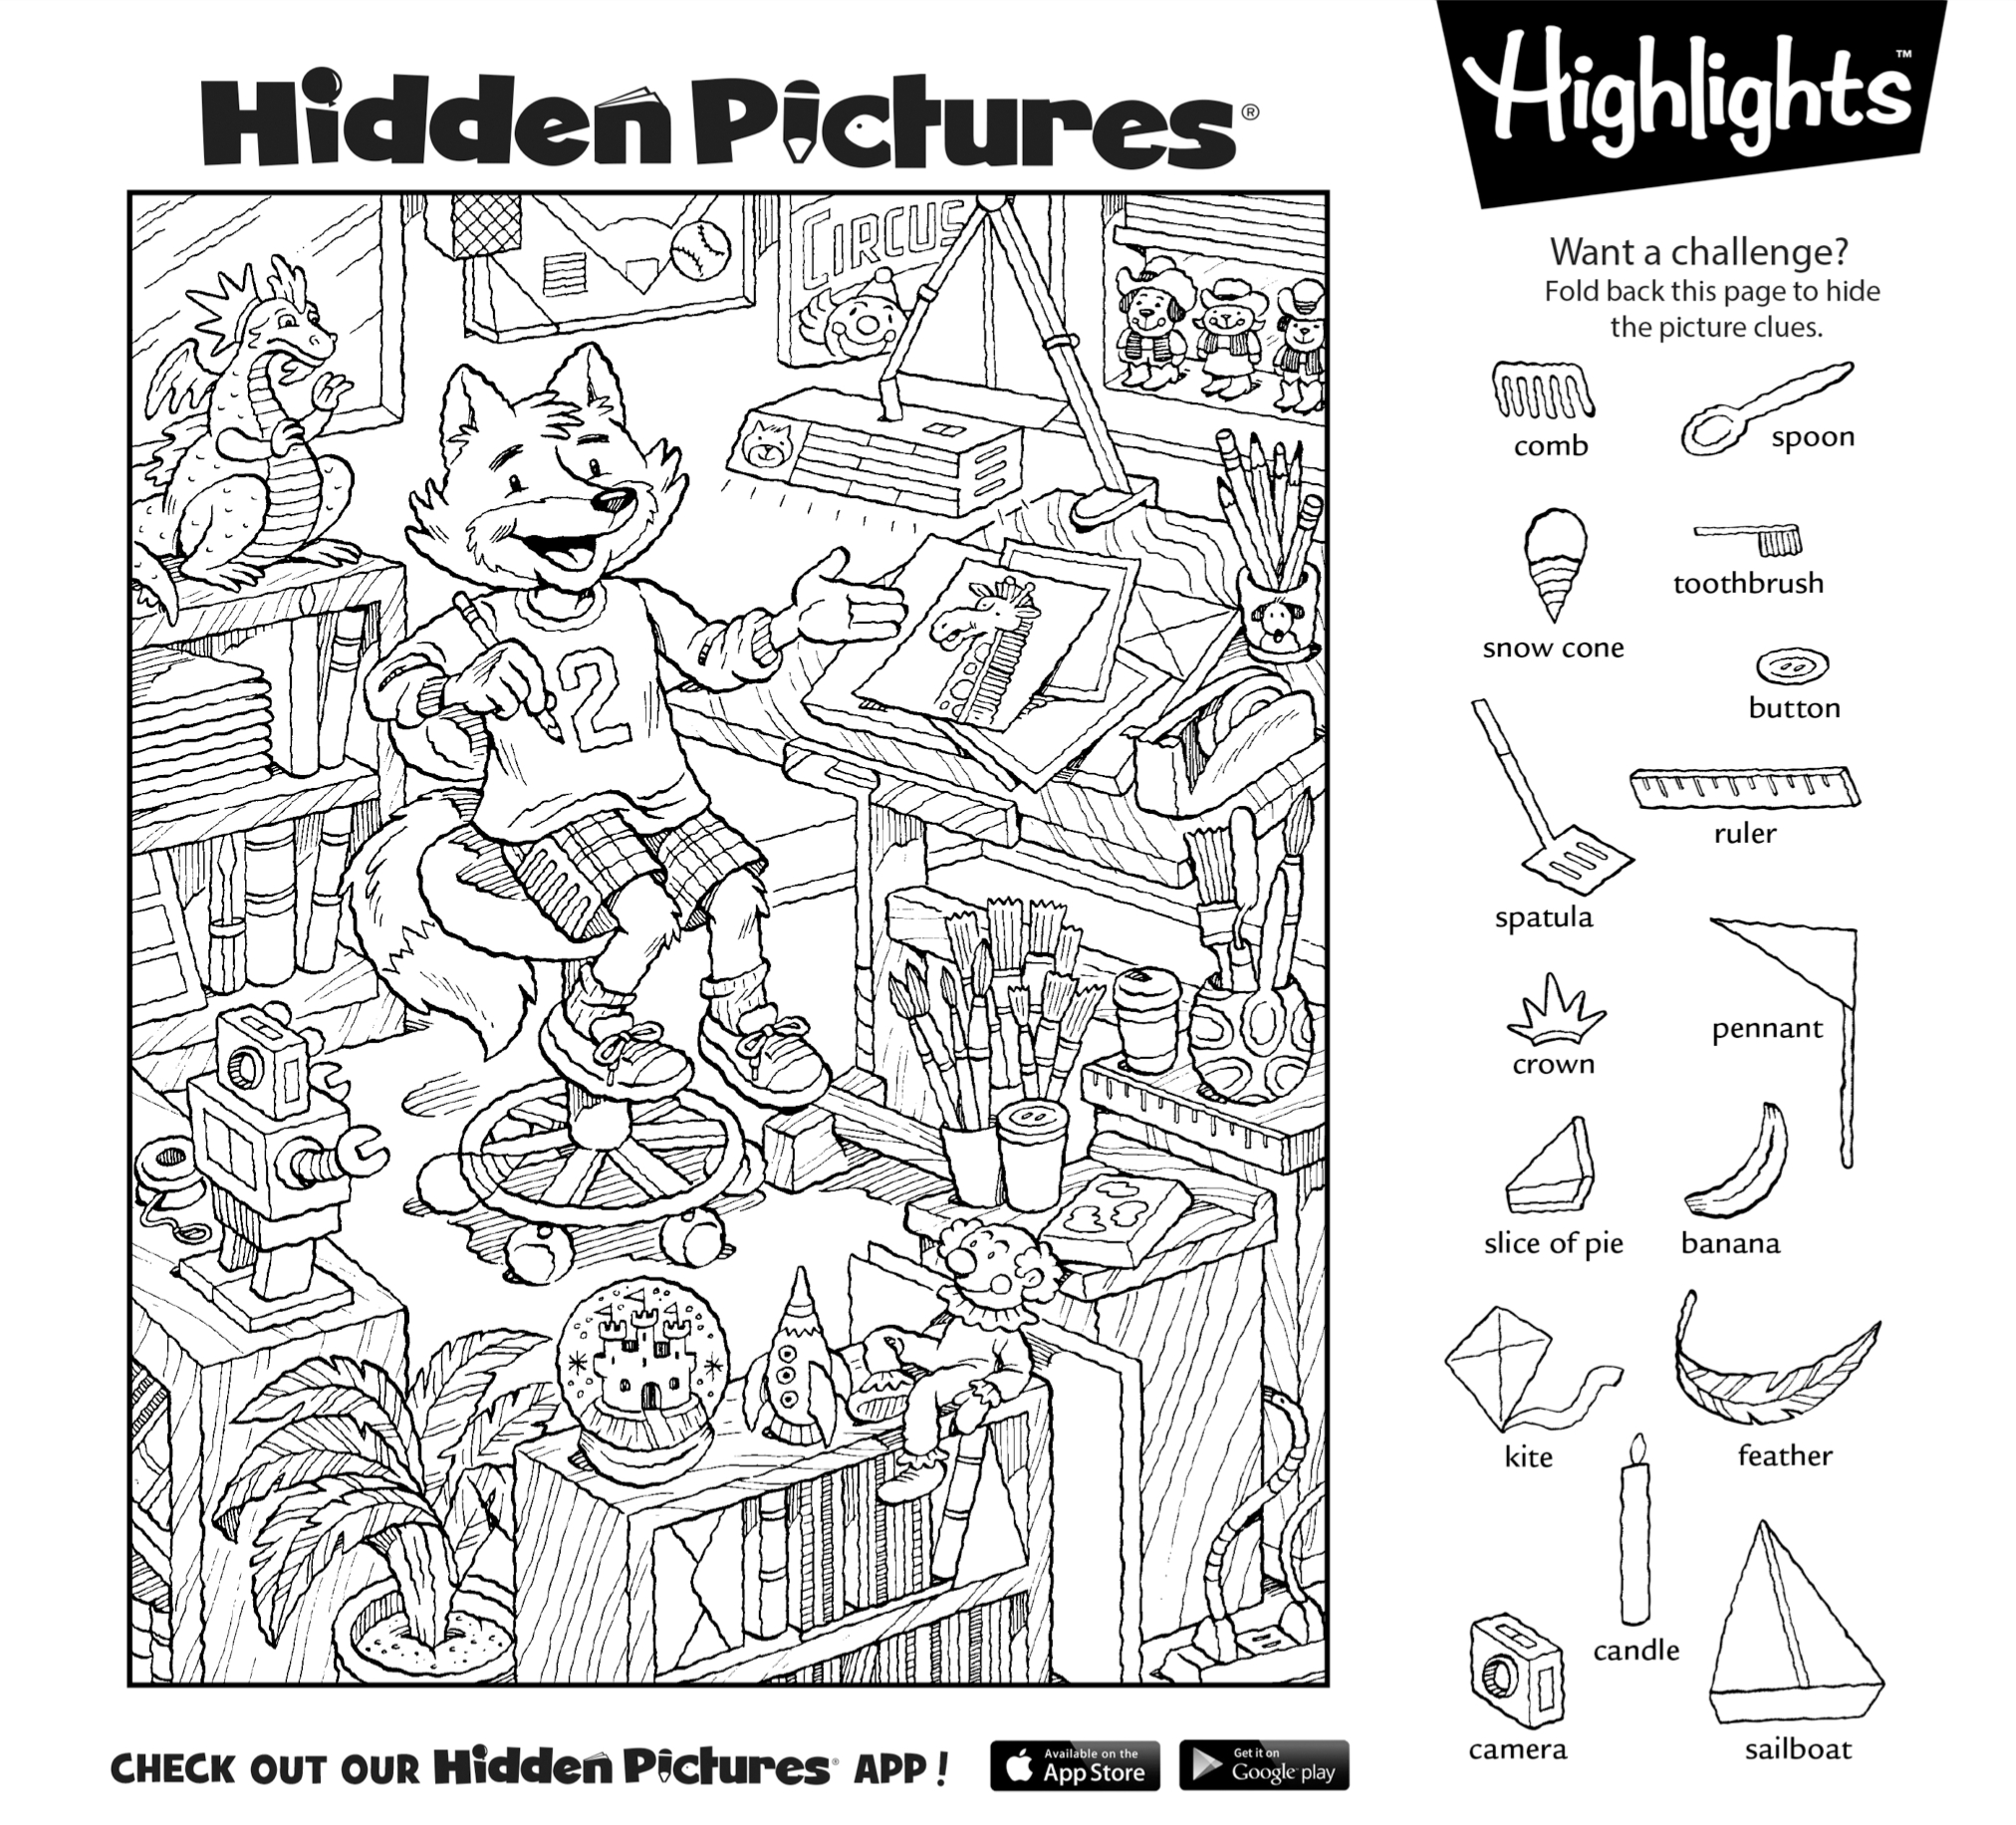 Download This Free Printable Hidden Pictures Puzzle To Share With - Free Printable Hidden Pictures For Kids